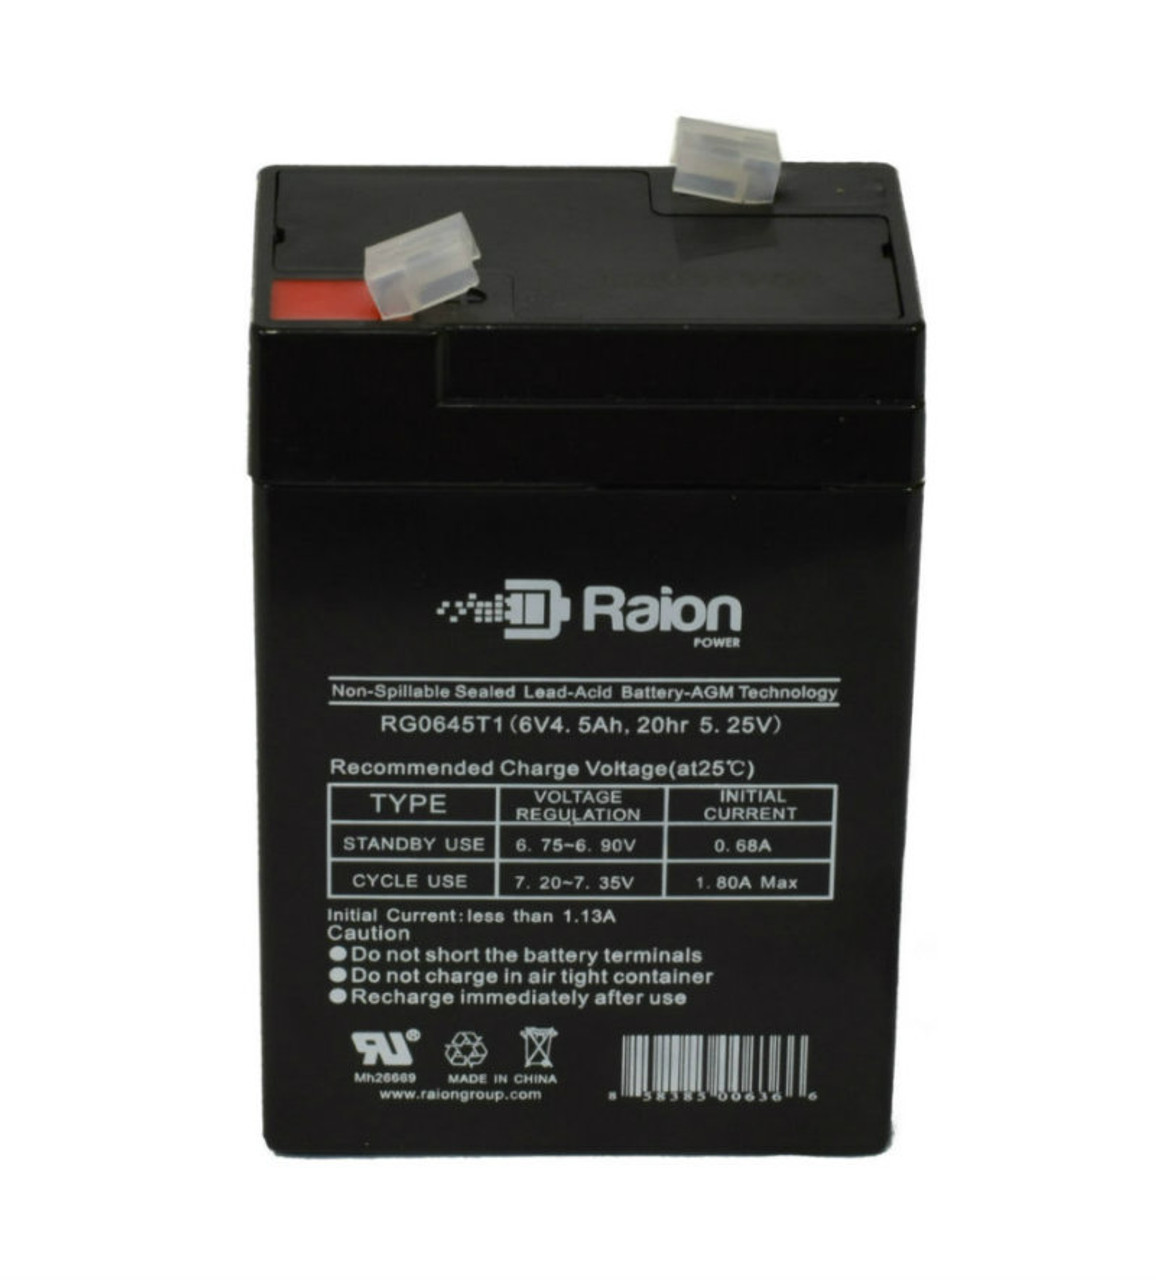 Raion Power RG0645T1 Replacement Battery Cartridge for Sho-Me 90985